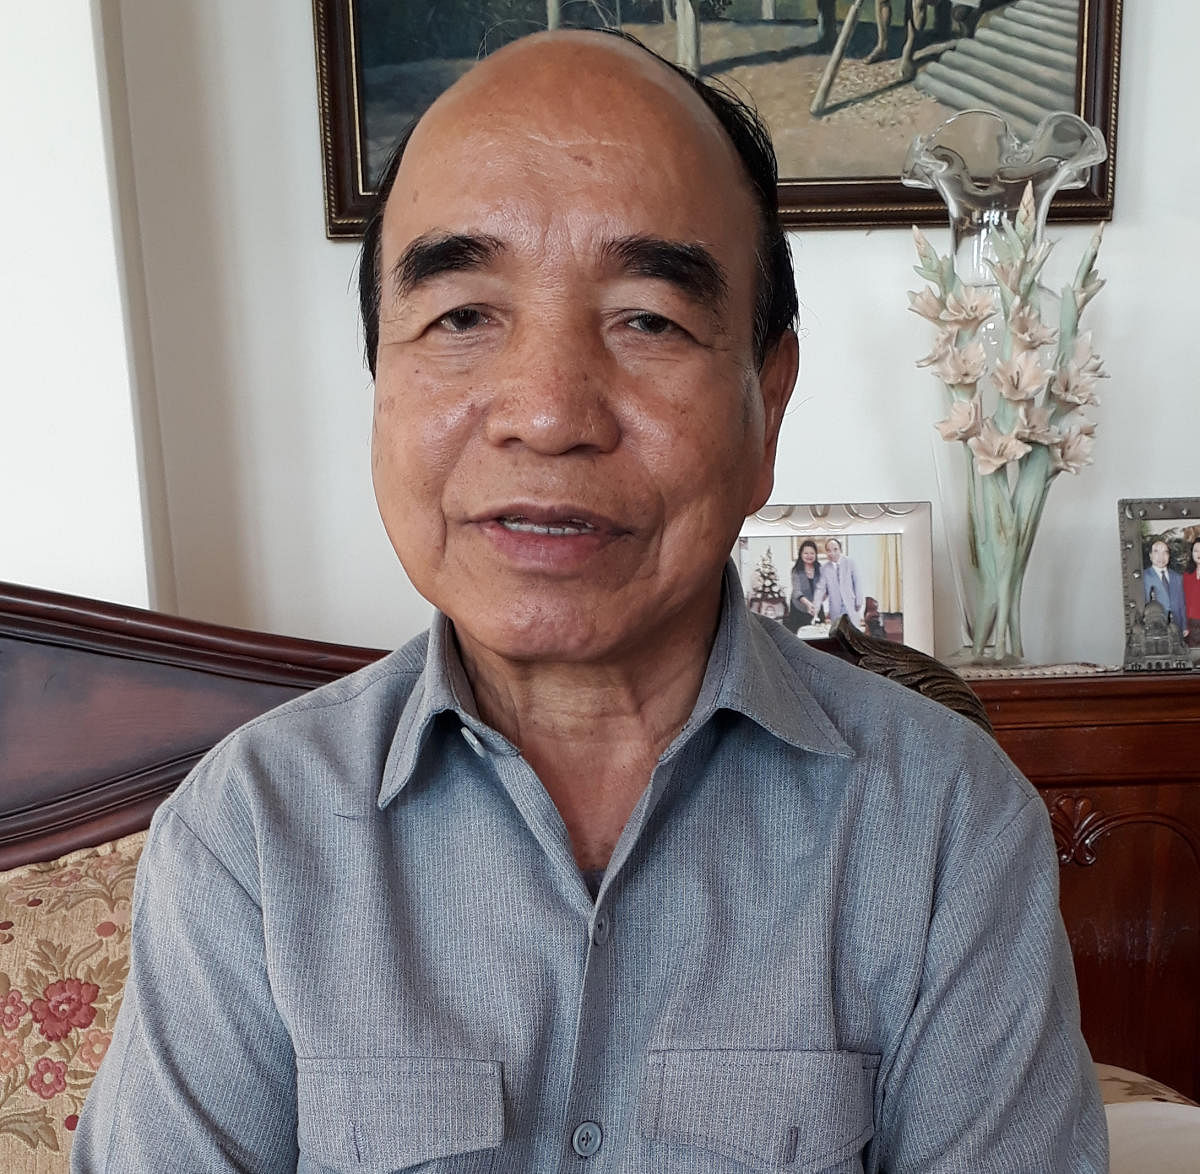 Mizoram Chief Minister Zoramthanga will not attend the swearing-in ceremony of Prime Minister Narendra Modi in Delhi on Thursday, an official at the Chief Minister's Office said. (TPML Photo)